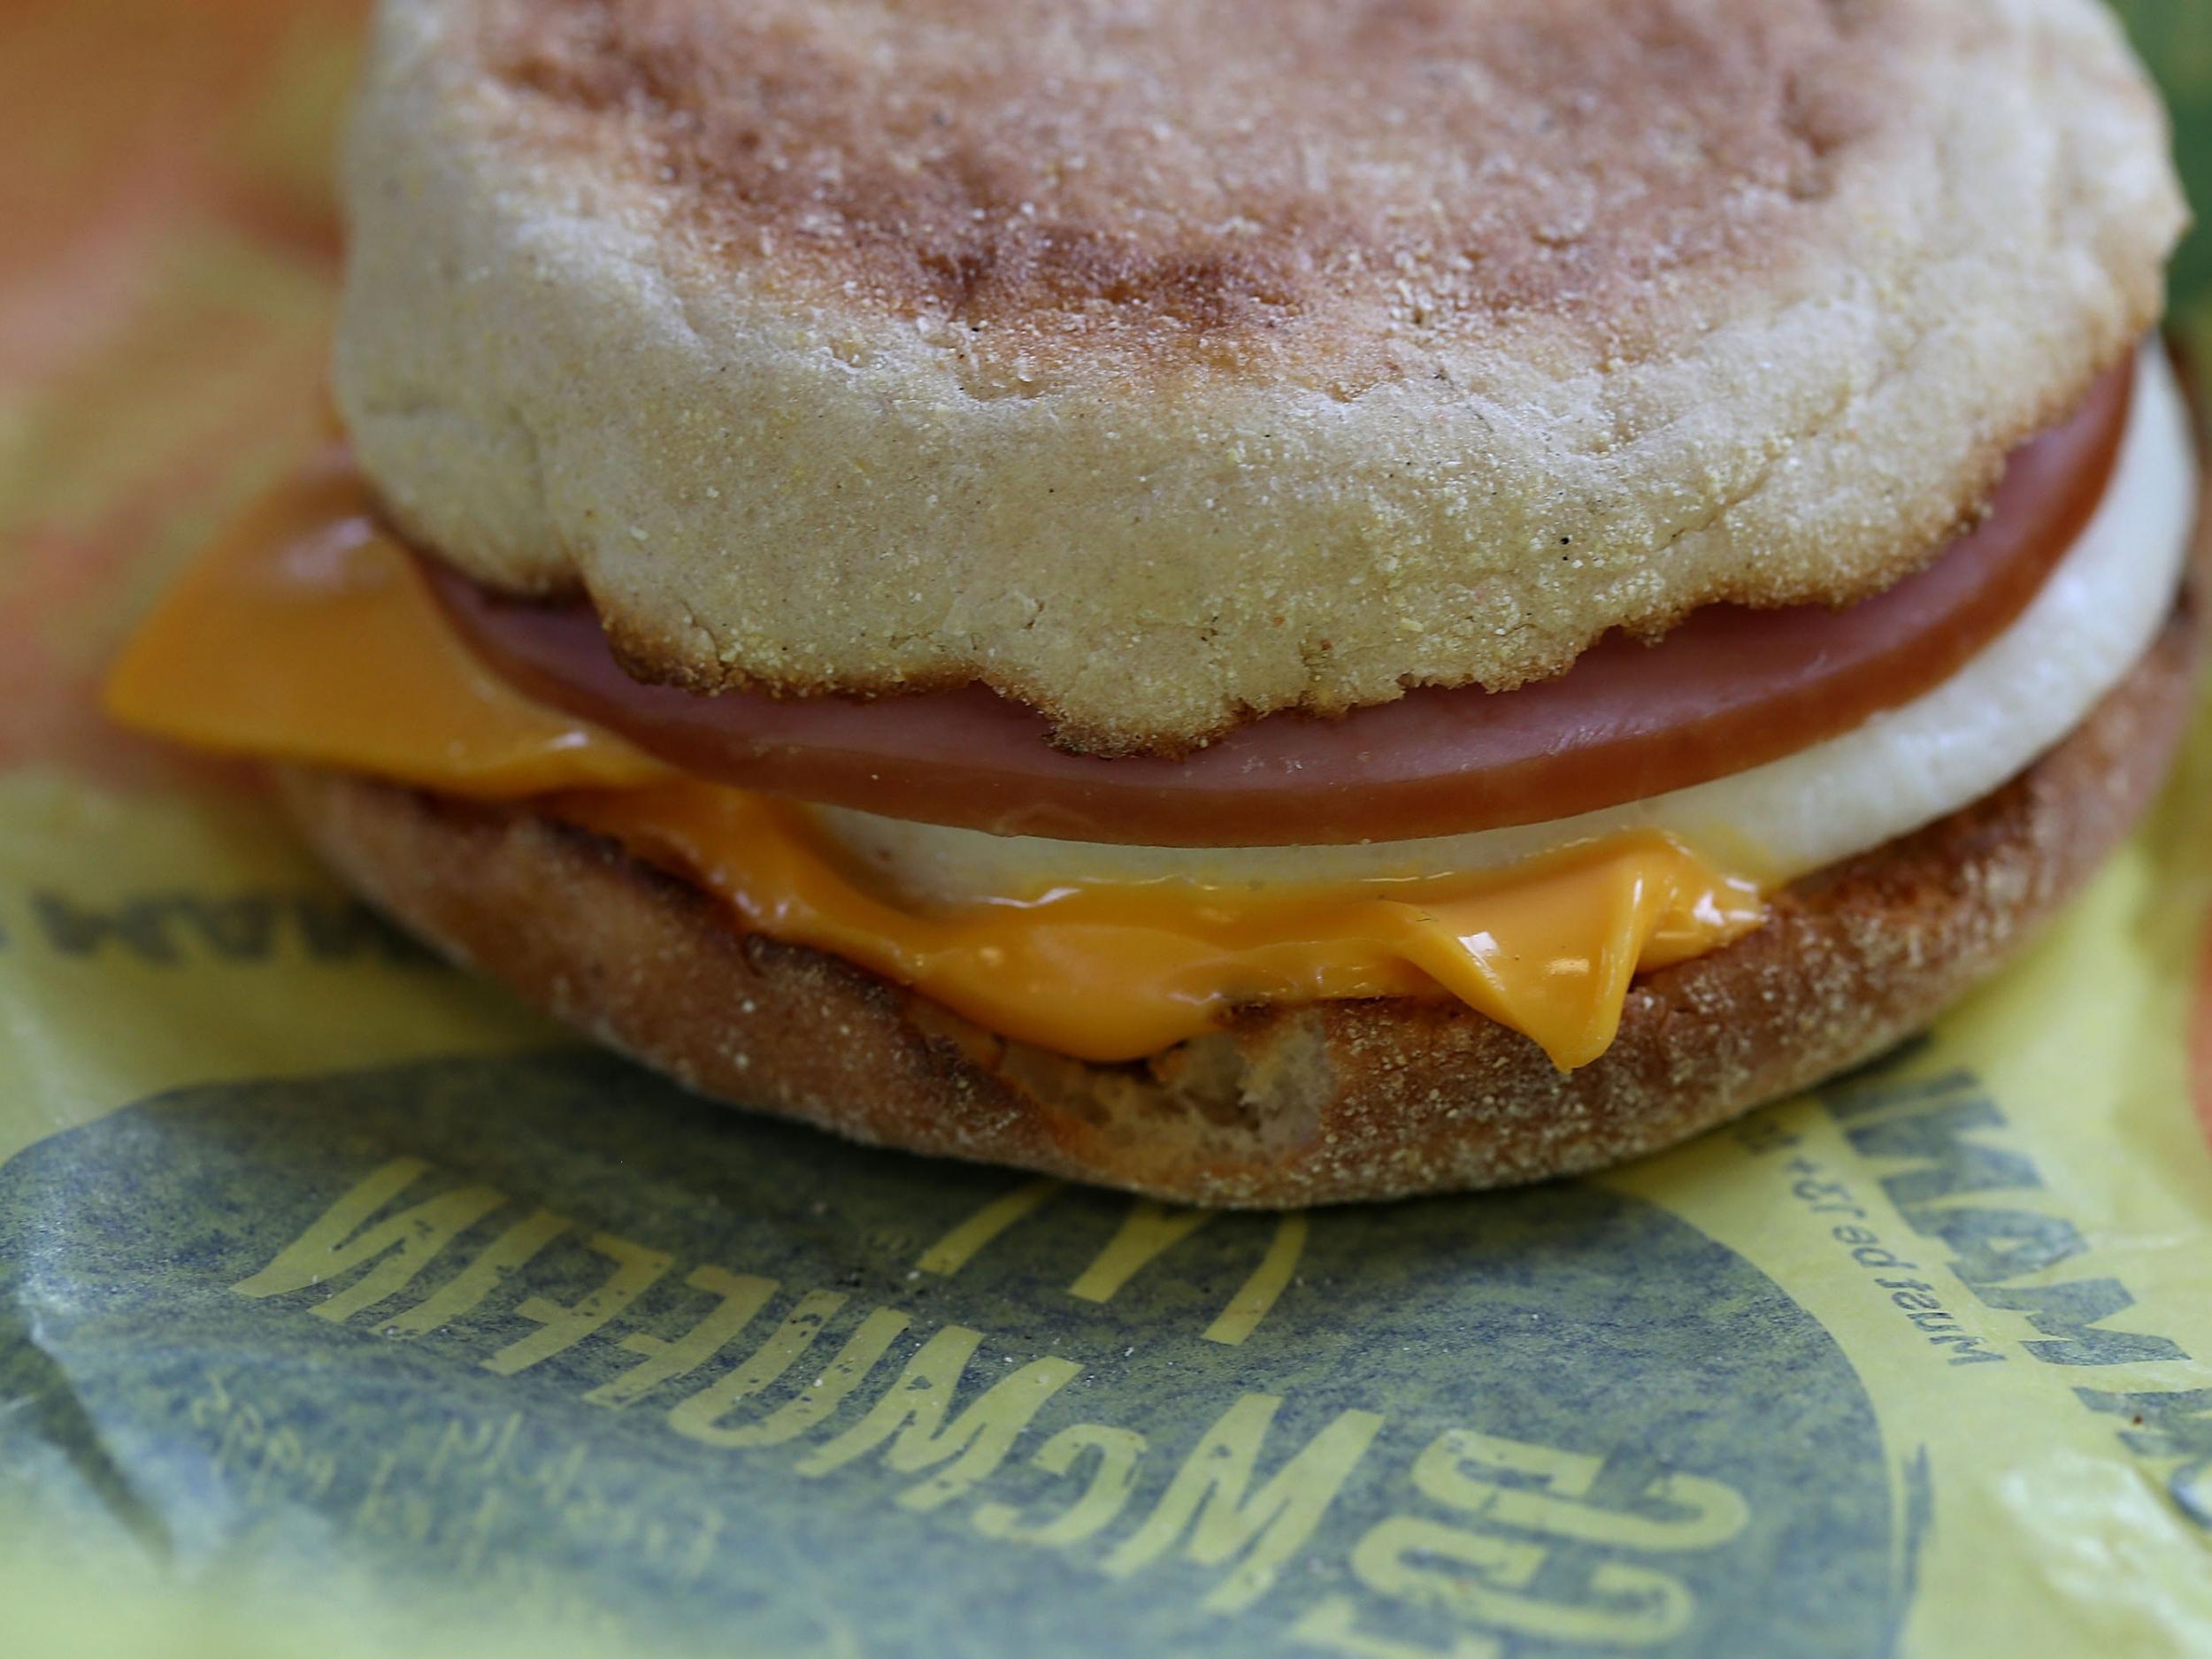 McDonald's making a big change to the McMuffin, getting rid of liquid margarine